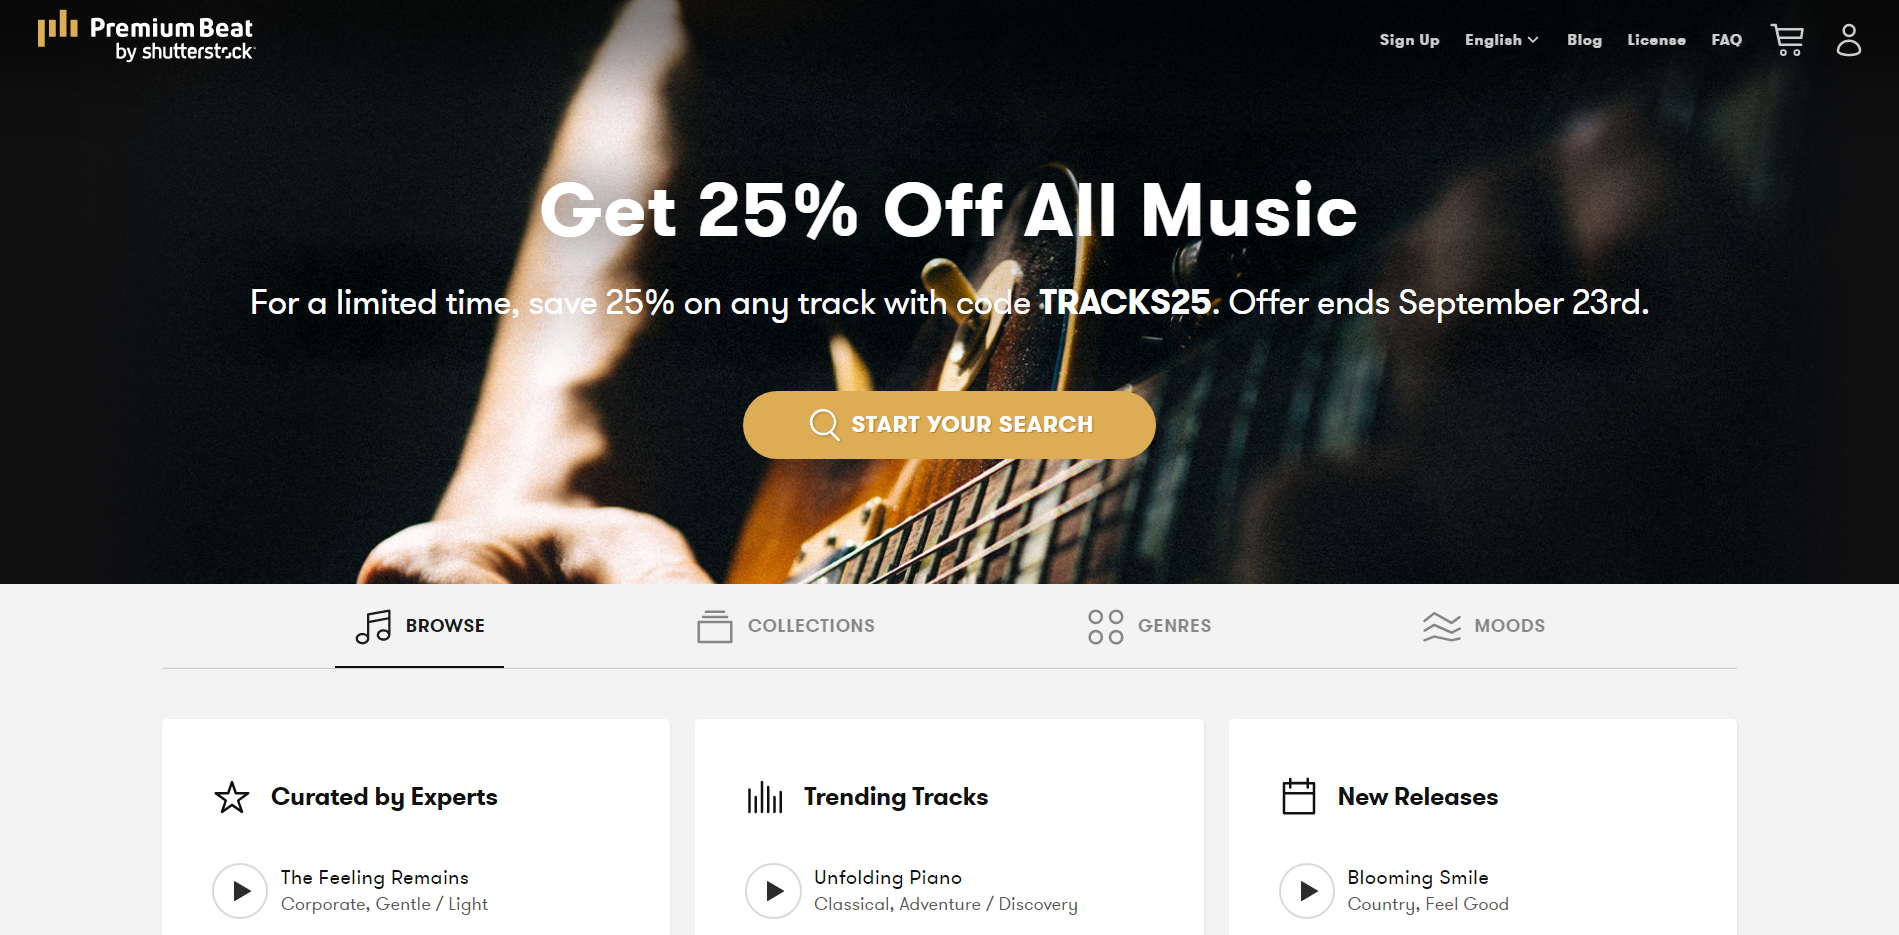 Get The Best Fresh and New Royalty Free Music - PremiumBeat